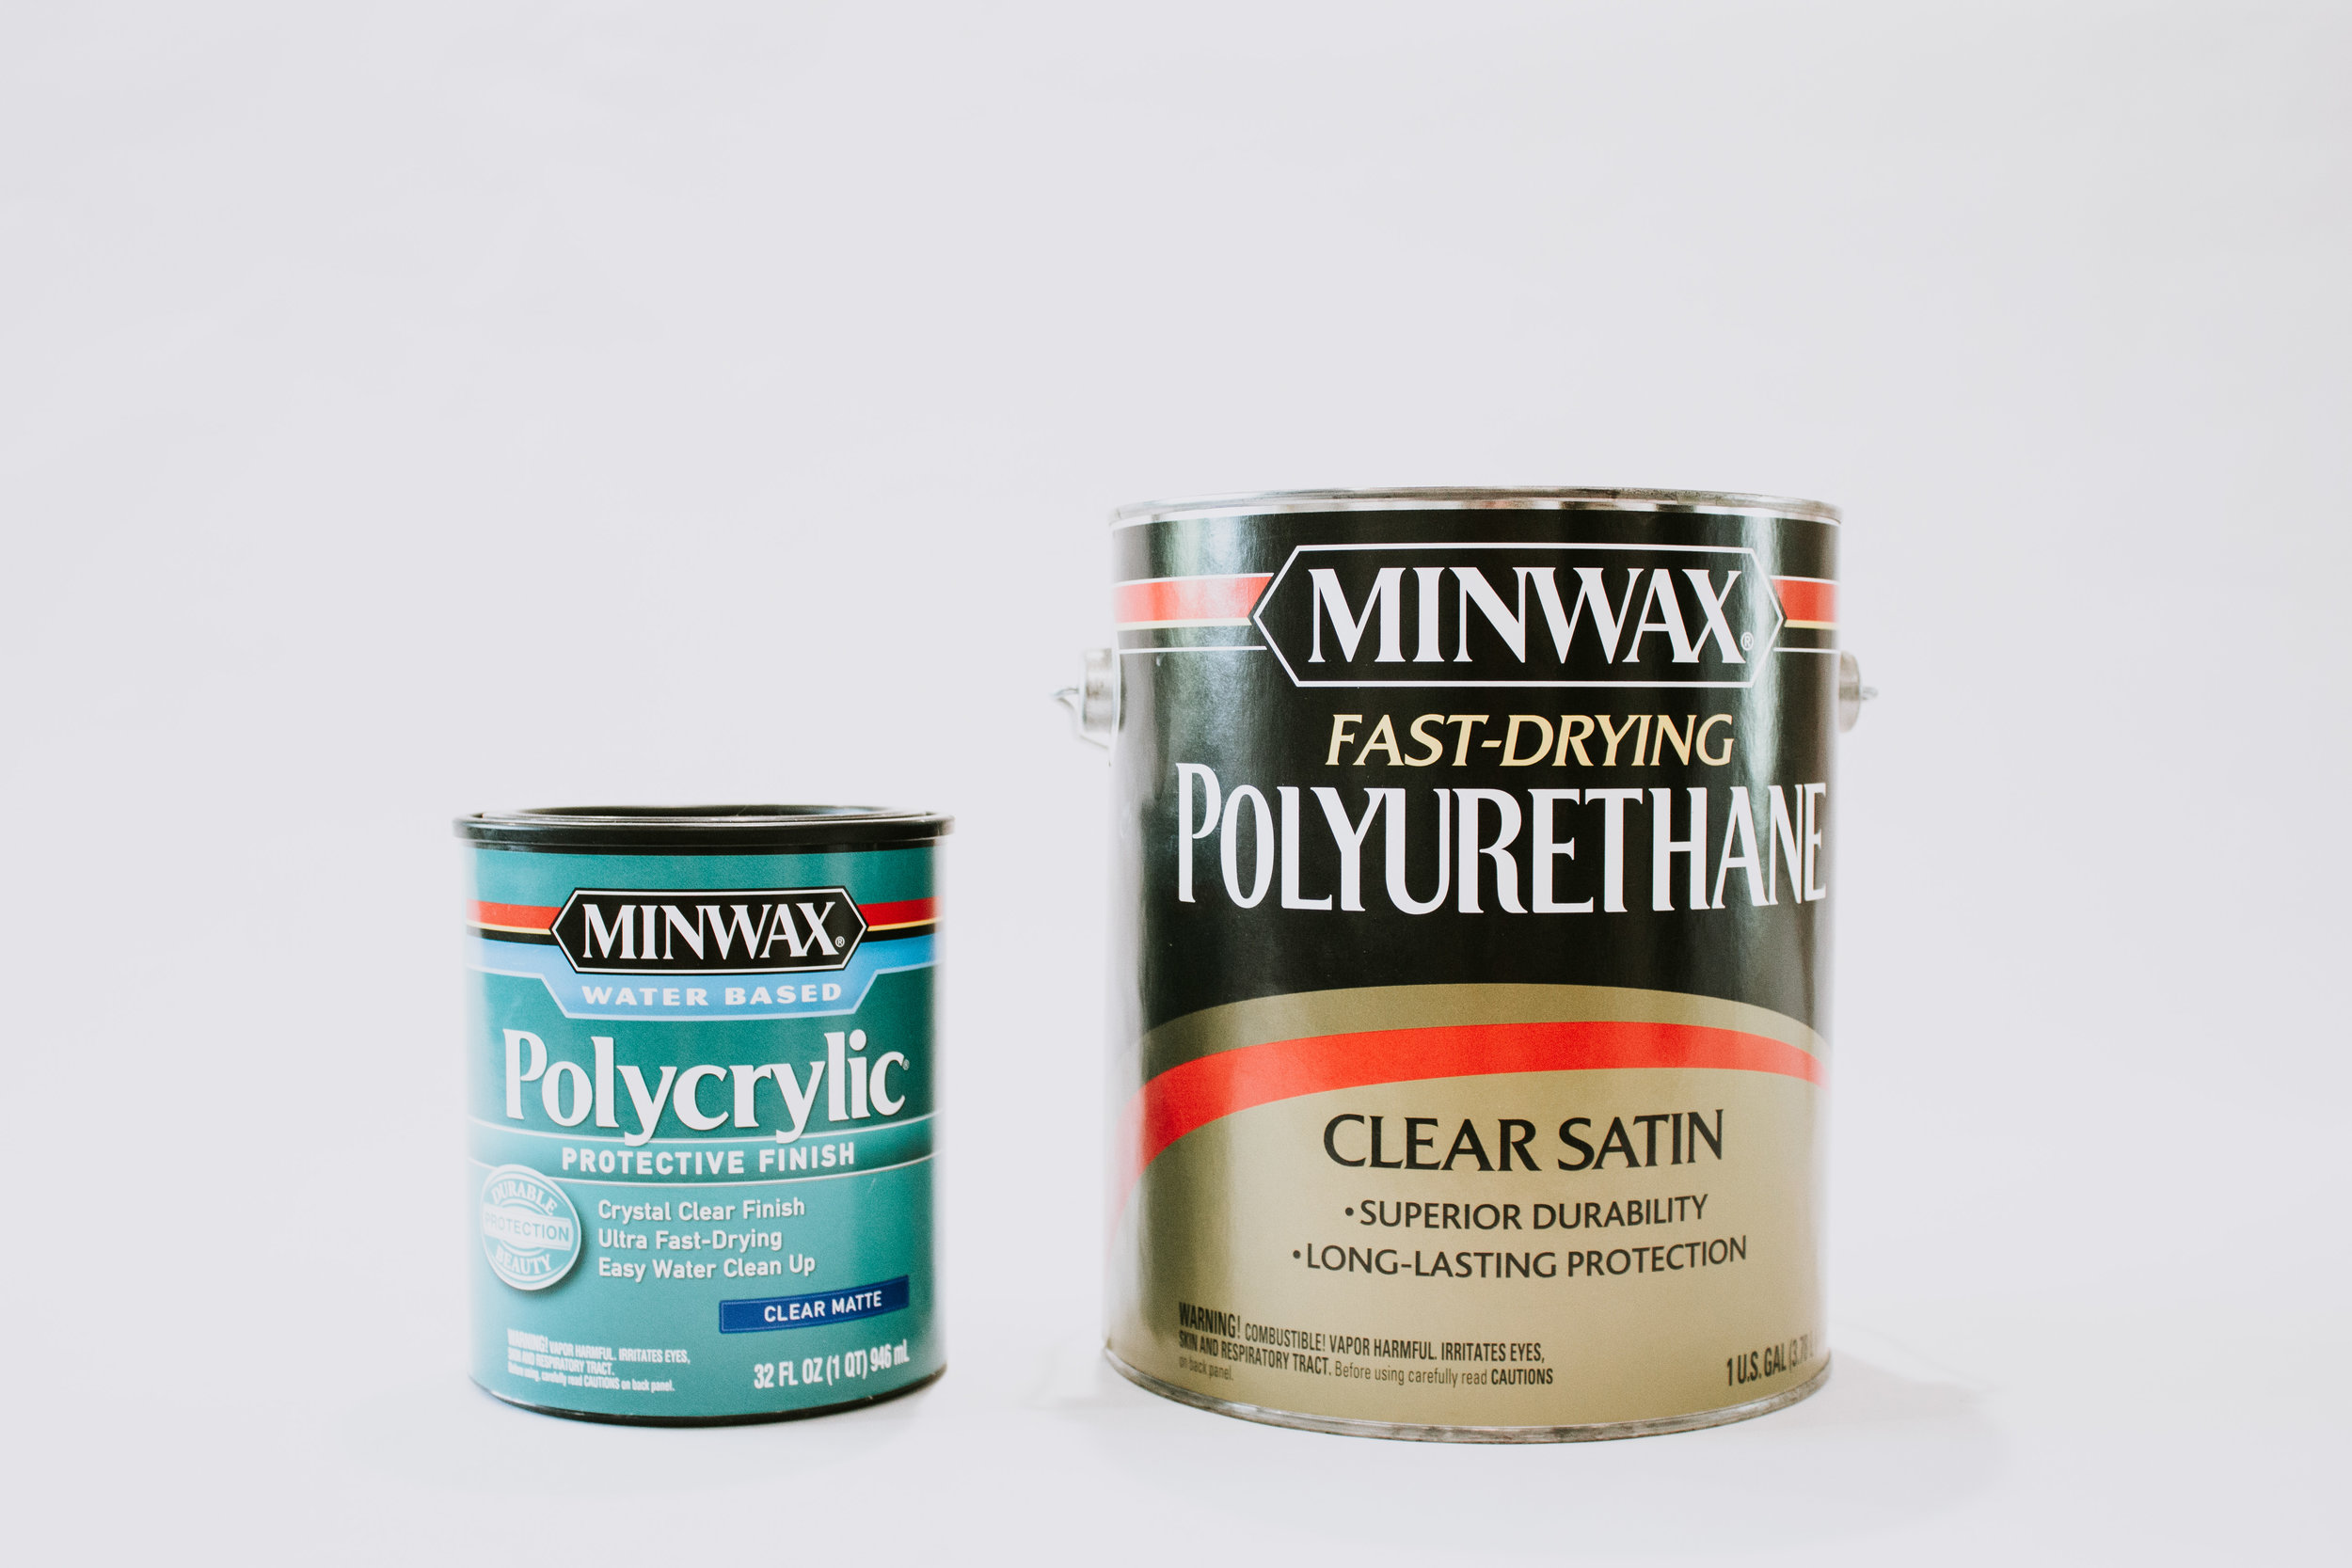 My go to paints, stains, and finishes for furniture and decor